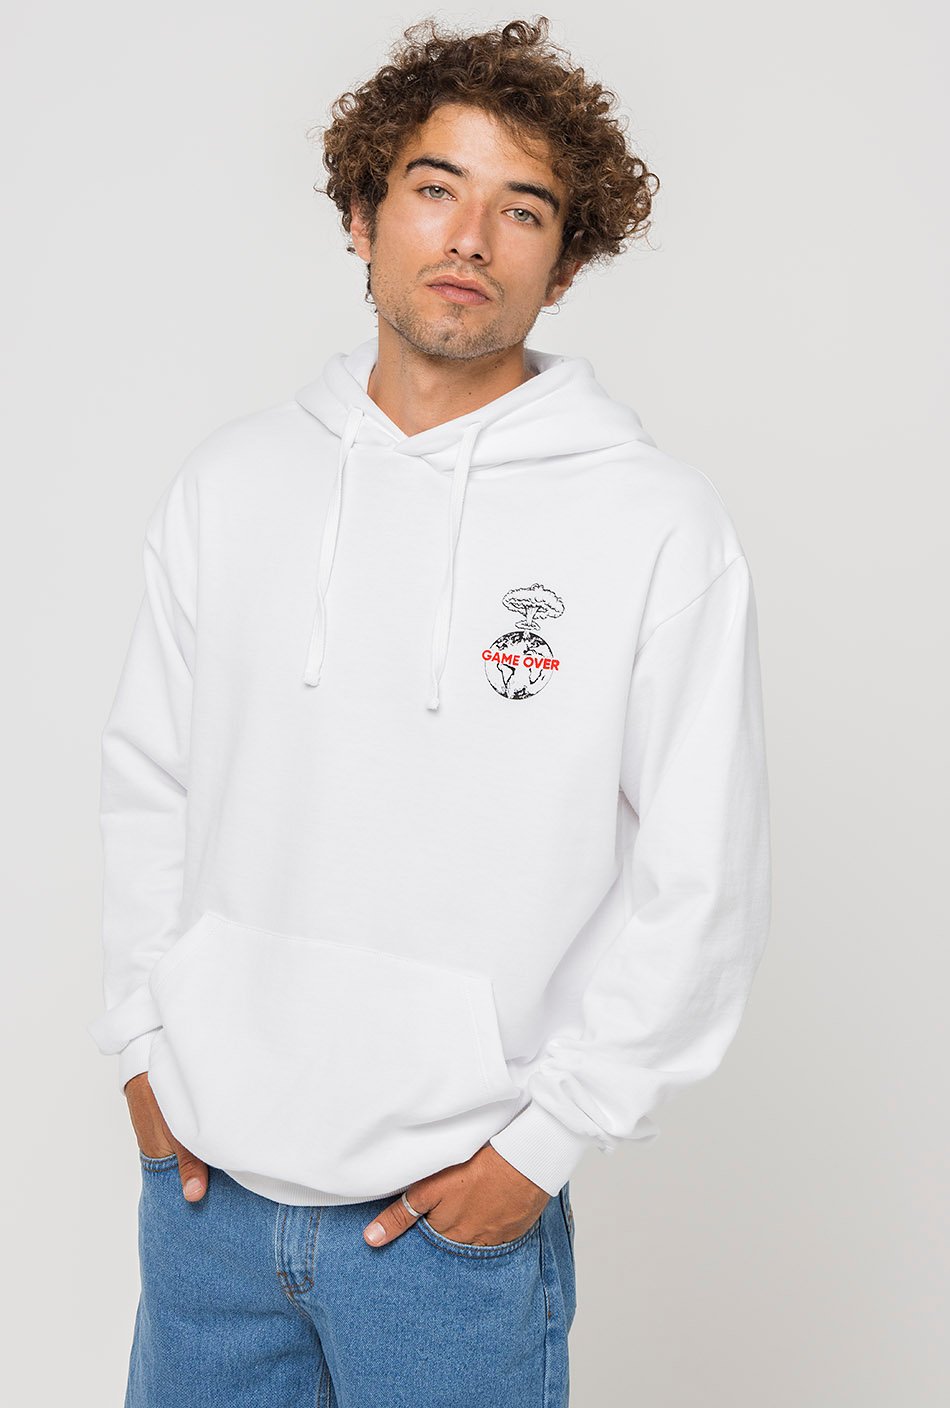 Game Over white hoodie